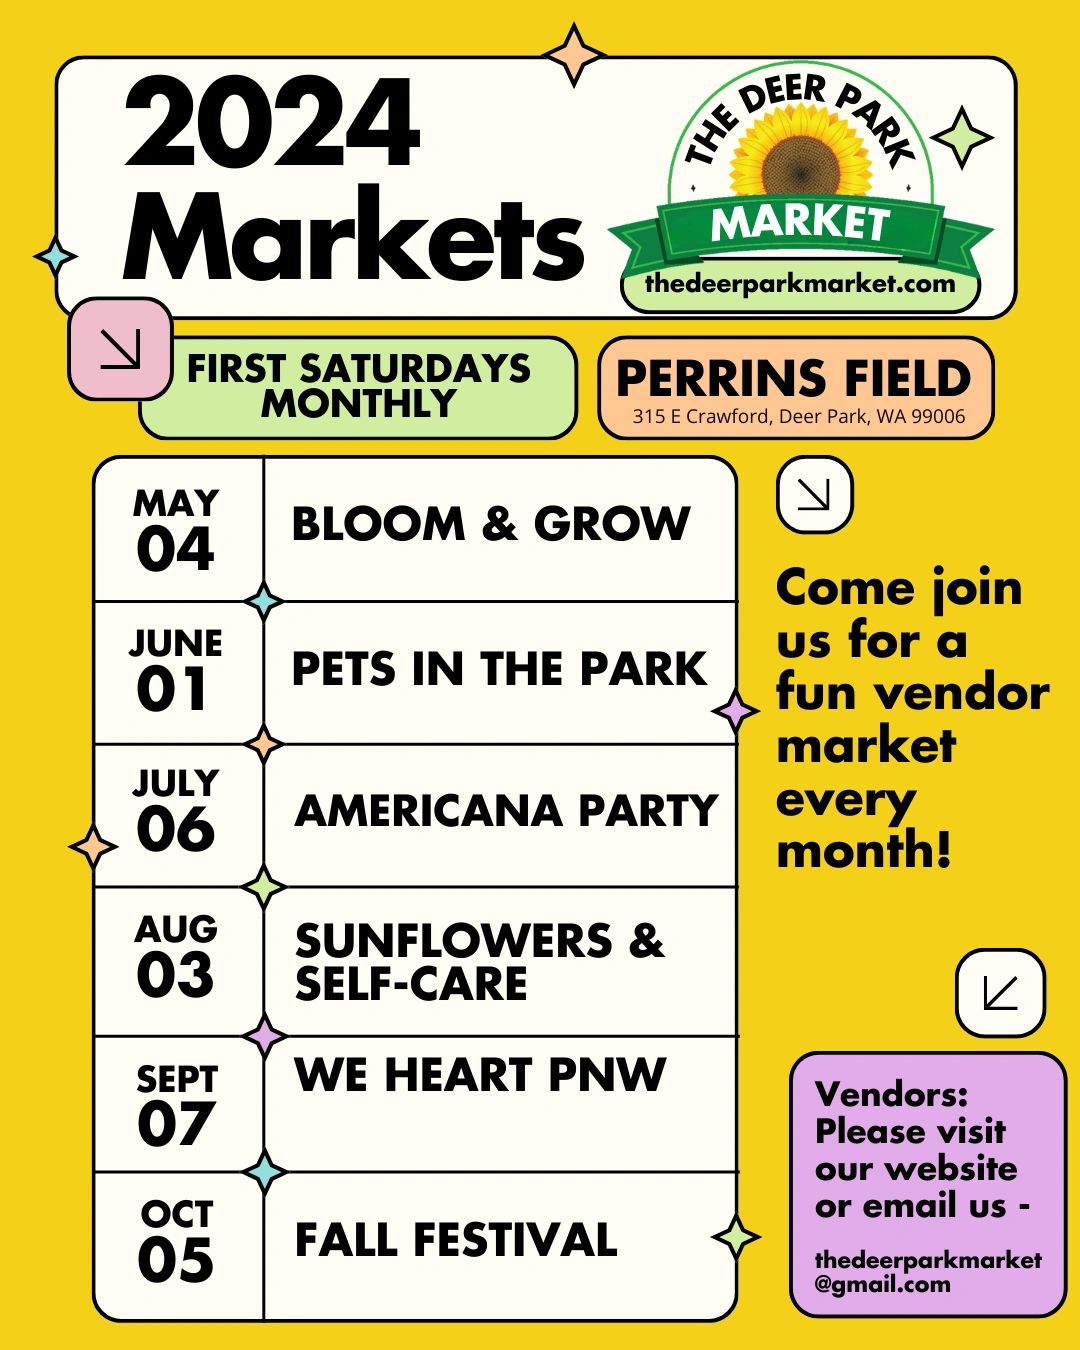 Dates for The Deer Park Market 2024 Promotional Graphic